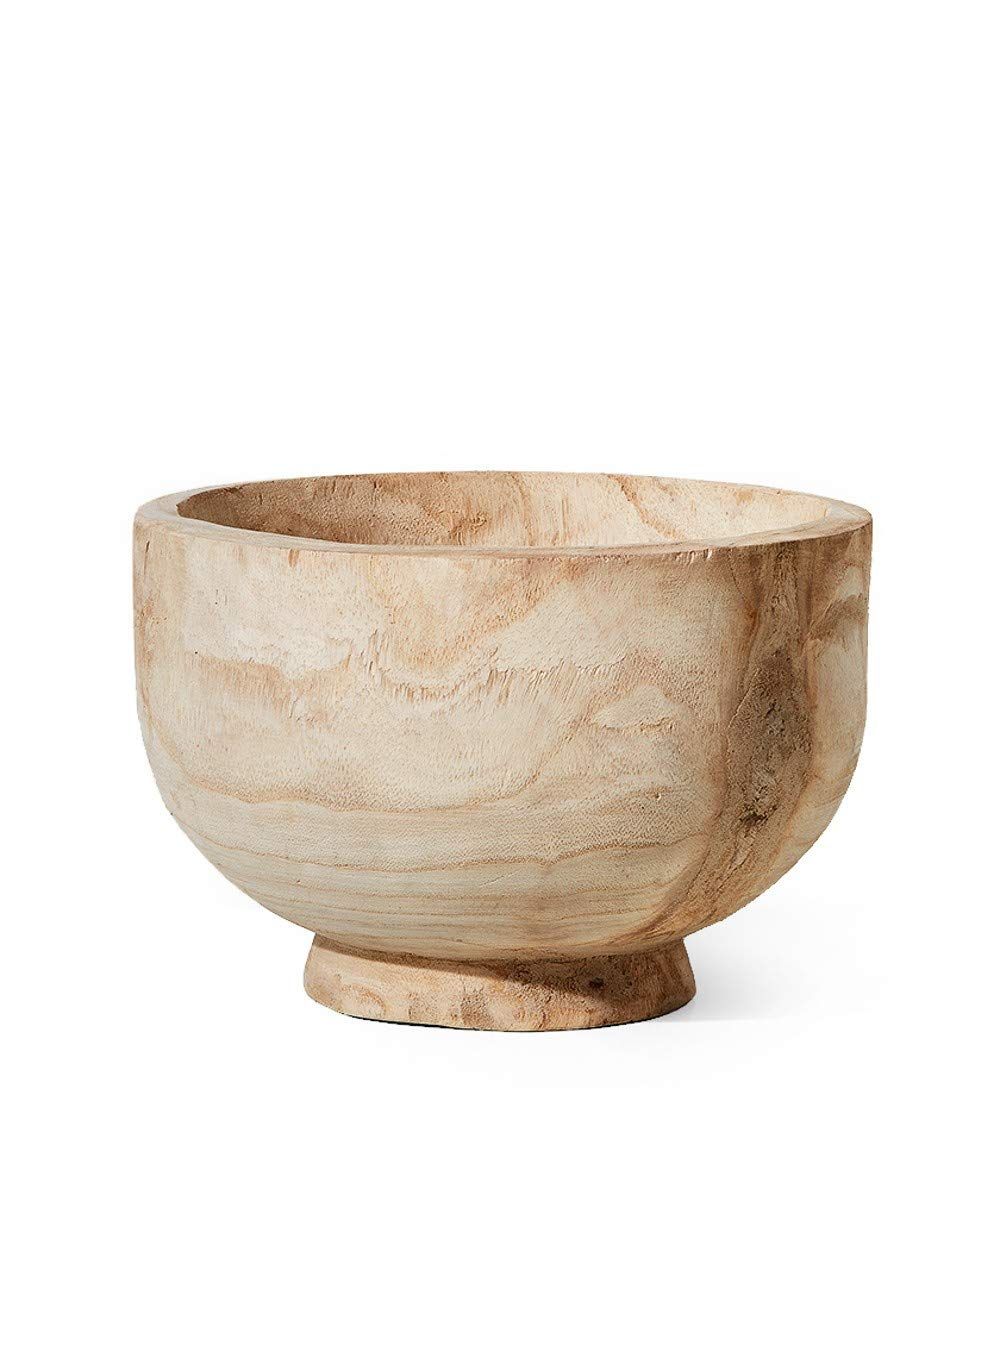 Serene Spaces Living 11" Paulownia Round Wood Bowl, Handmade Wooden Decorative Bowl for Décor, Parti | Amazon (US)